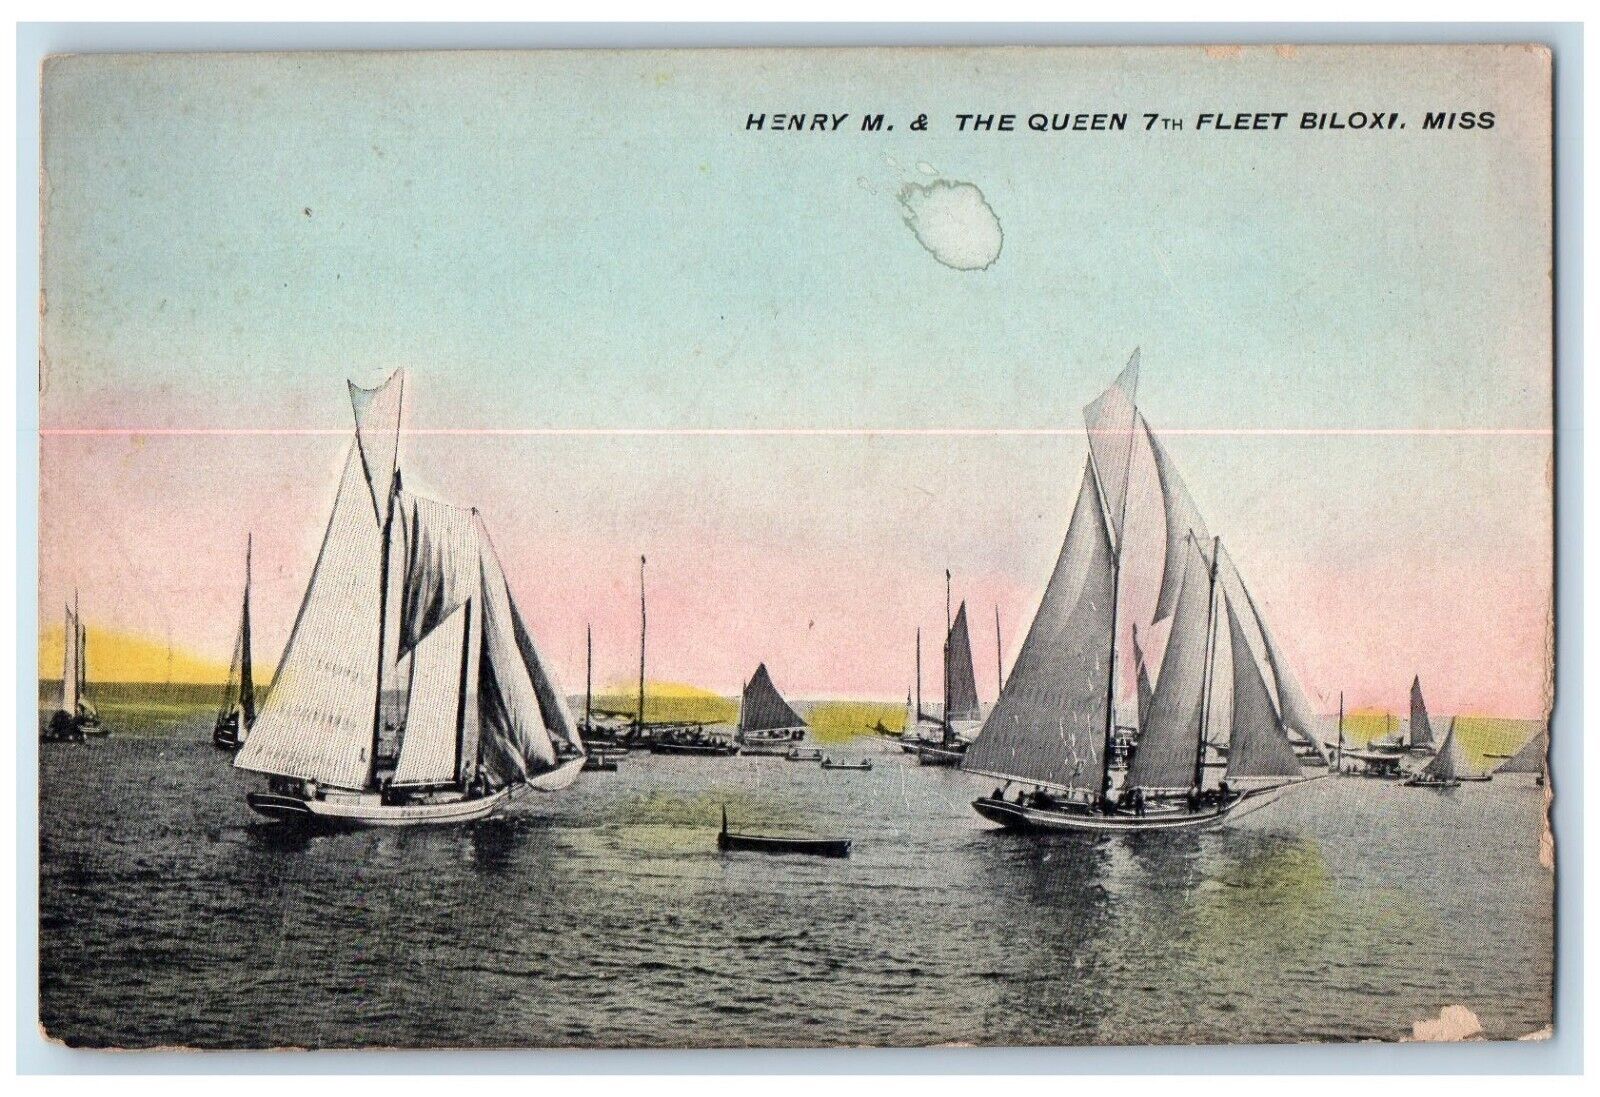 c1910's Henry M. & The Queen 7th Fleet Biloxi Mississippi MS, Sailboat Postcard